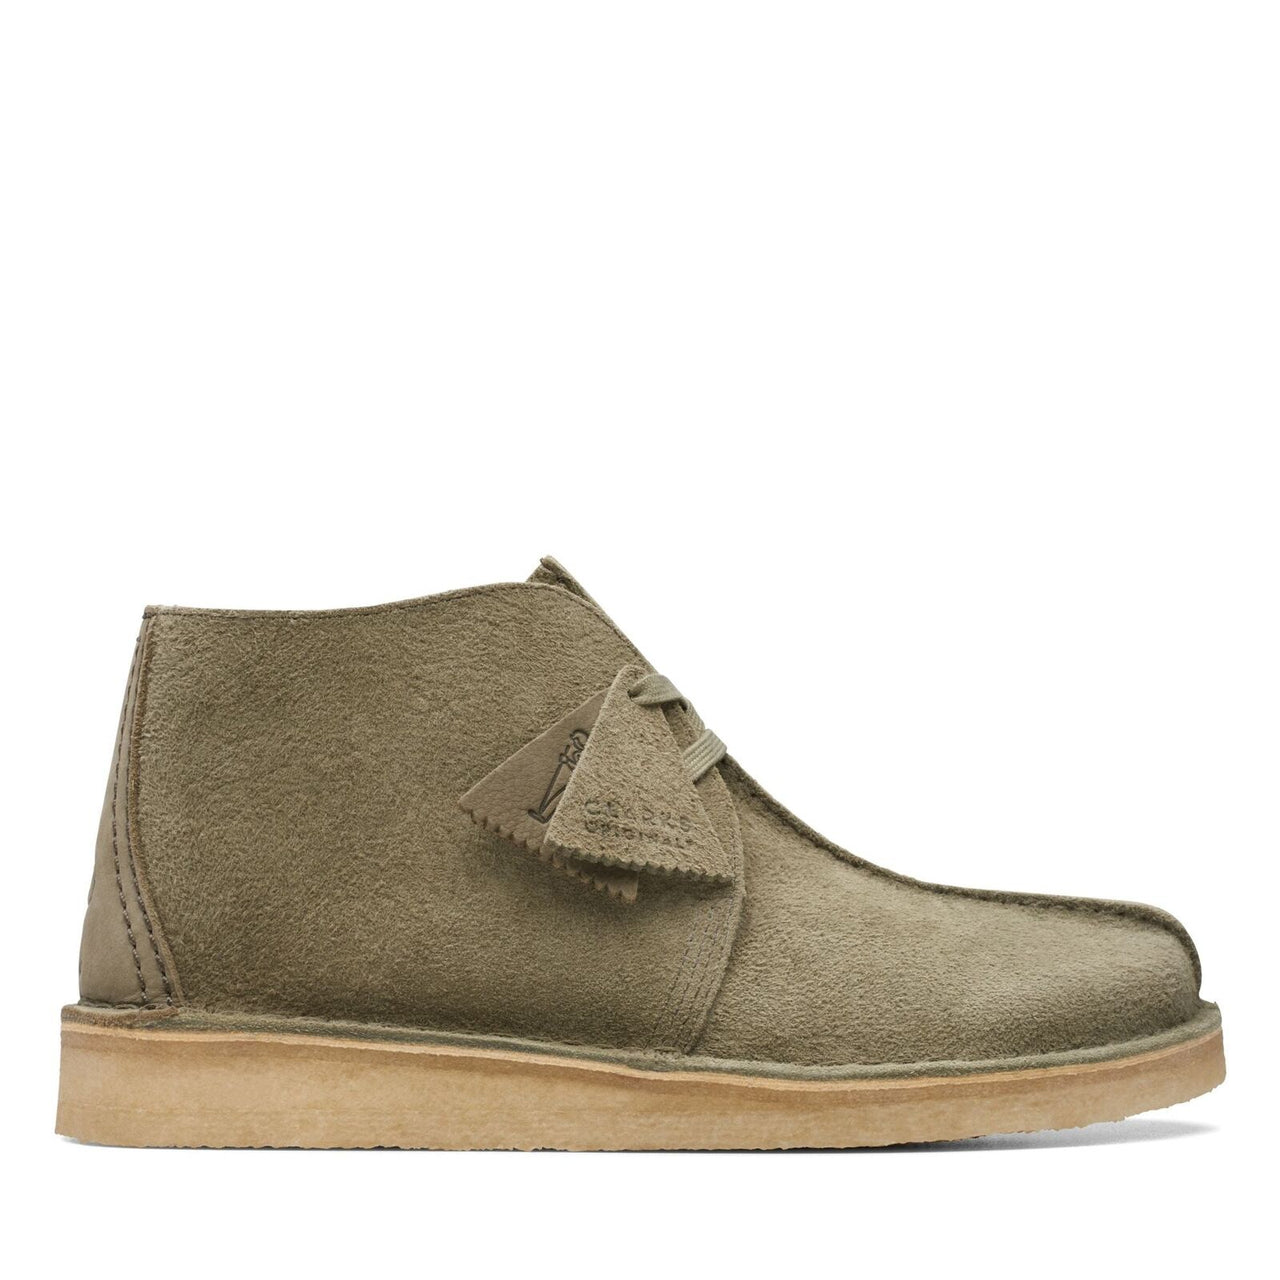 Clarks Originals Desert Trek Hi 50 Men's Forest Green Suede 26173615 shoes standing on a rocky trail with a forest in the background